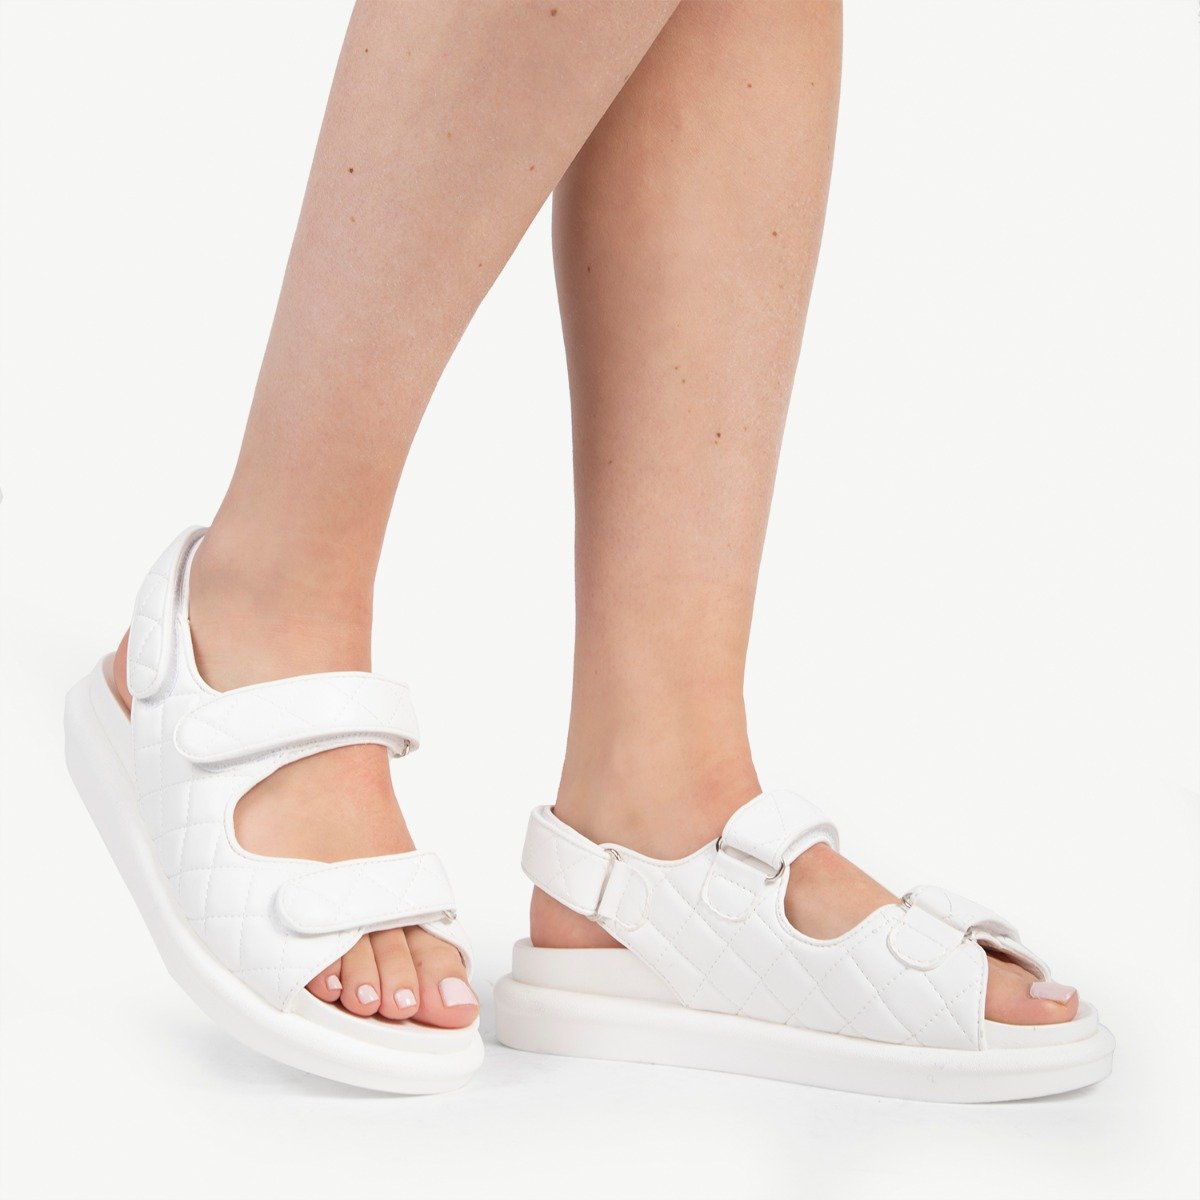 RAID Amylia Quilted Sandal in White